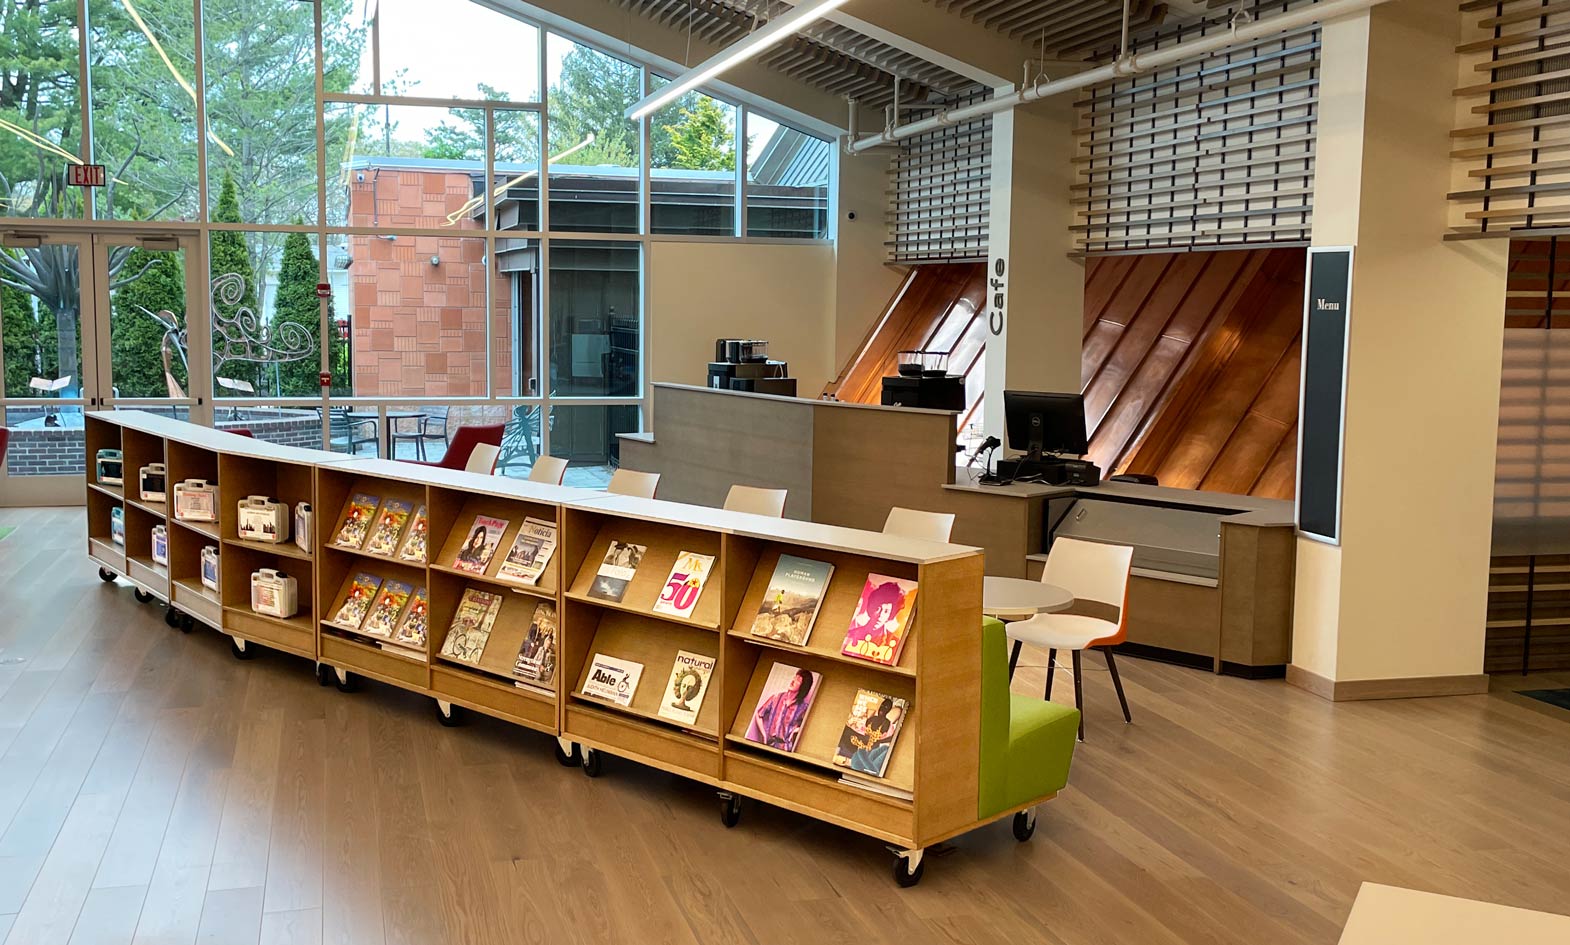 Public Library shelving on casters